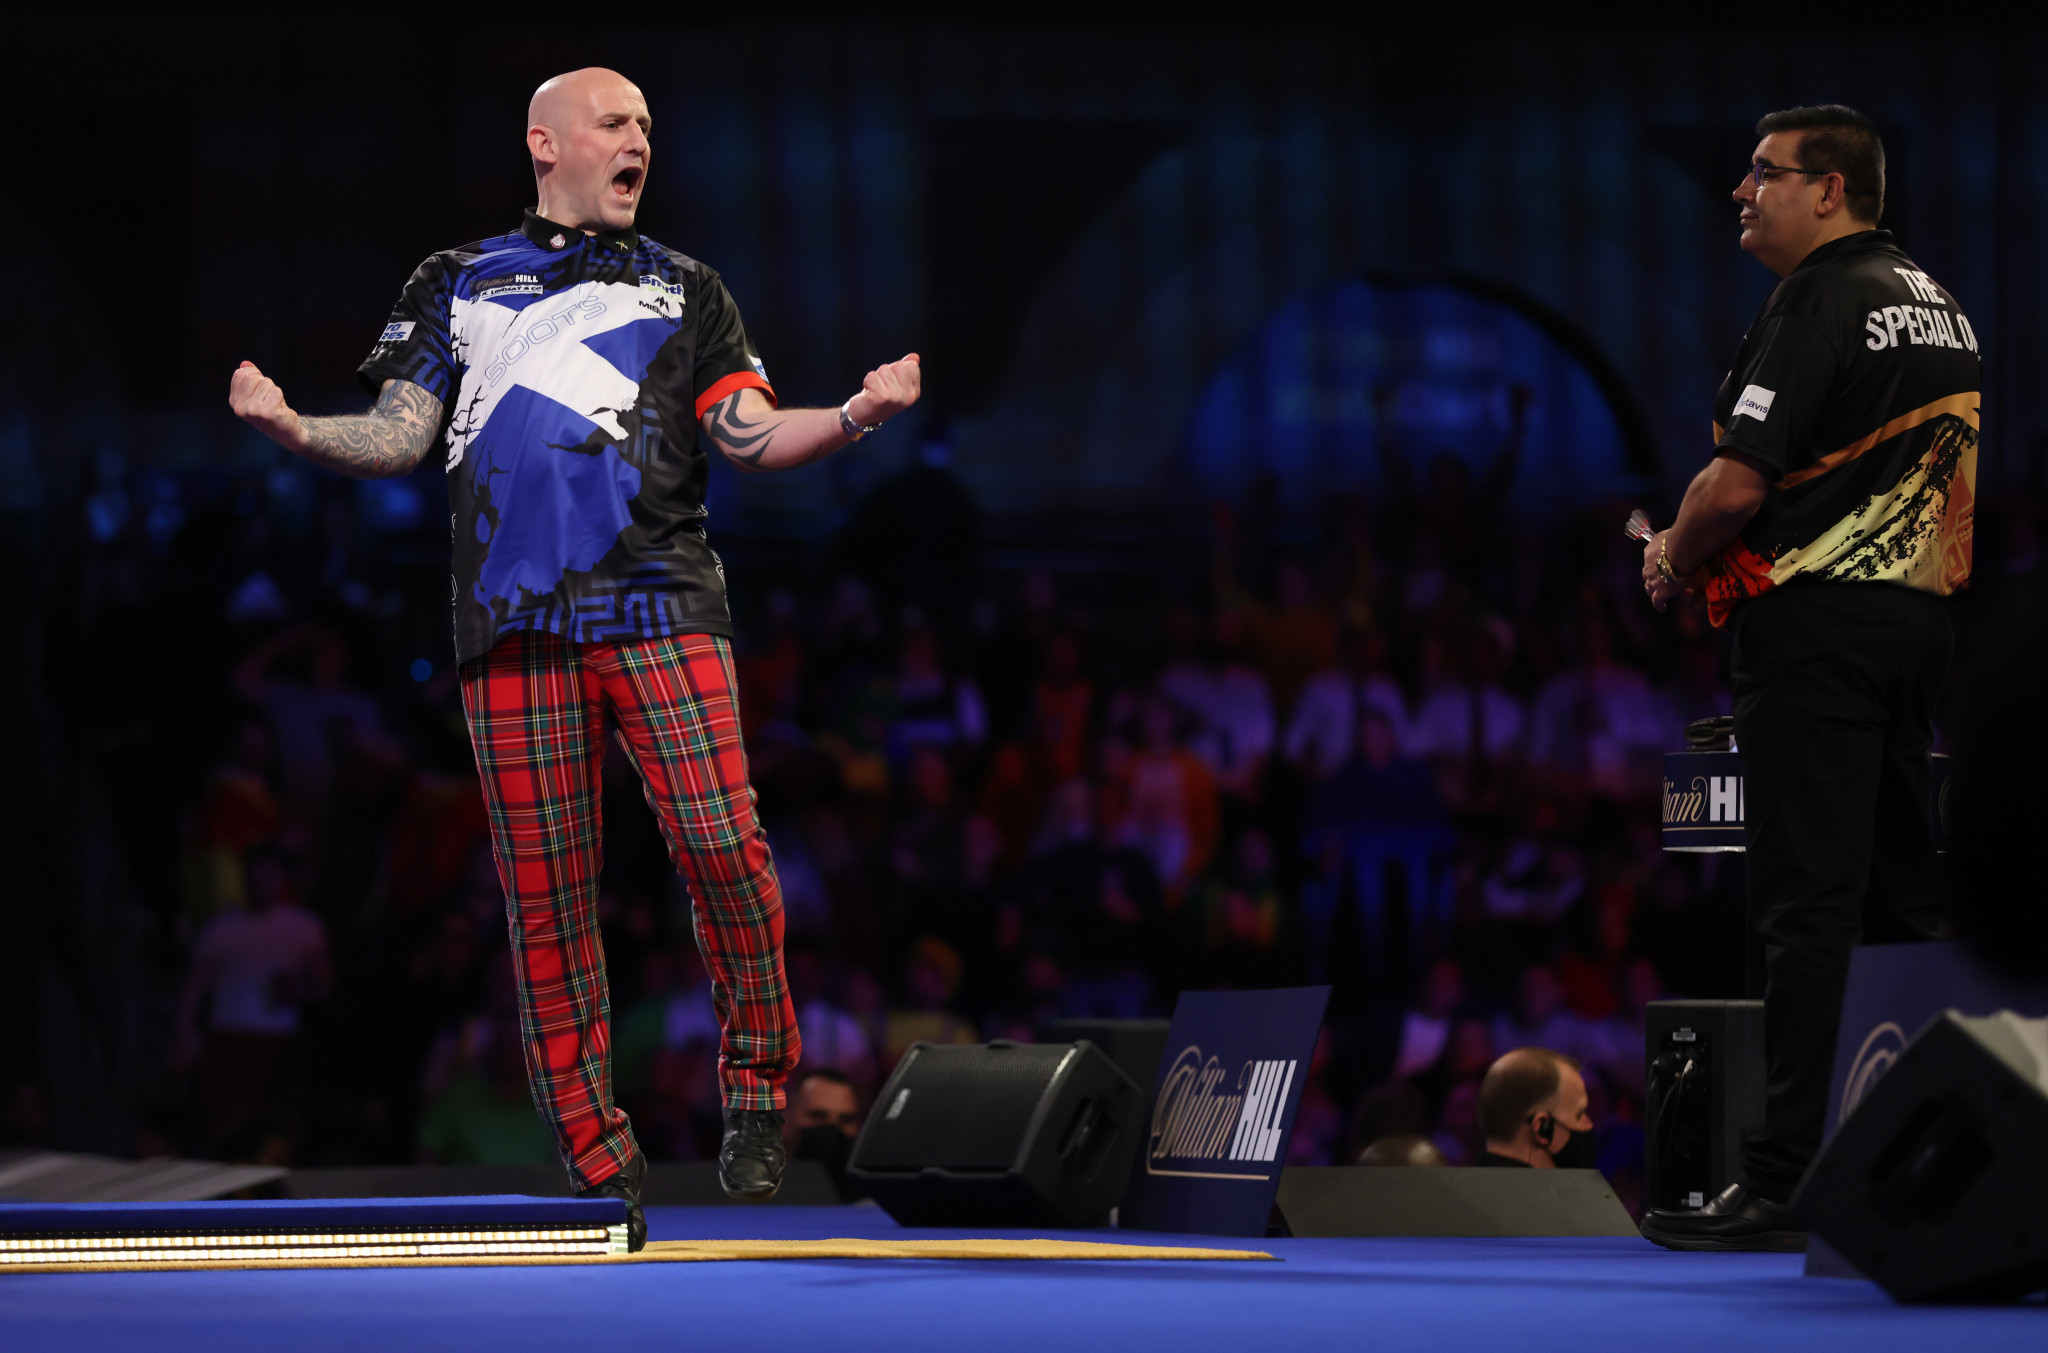 Scotland's Alan Soutar twice came from behind to reach the fourth round of the PDC World Darts Championship, after knocking out seventh seed Jose De Sousa ©Getty Images